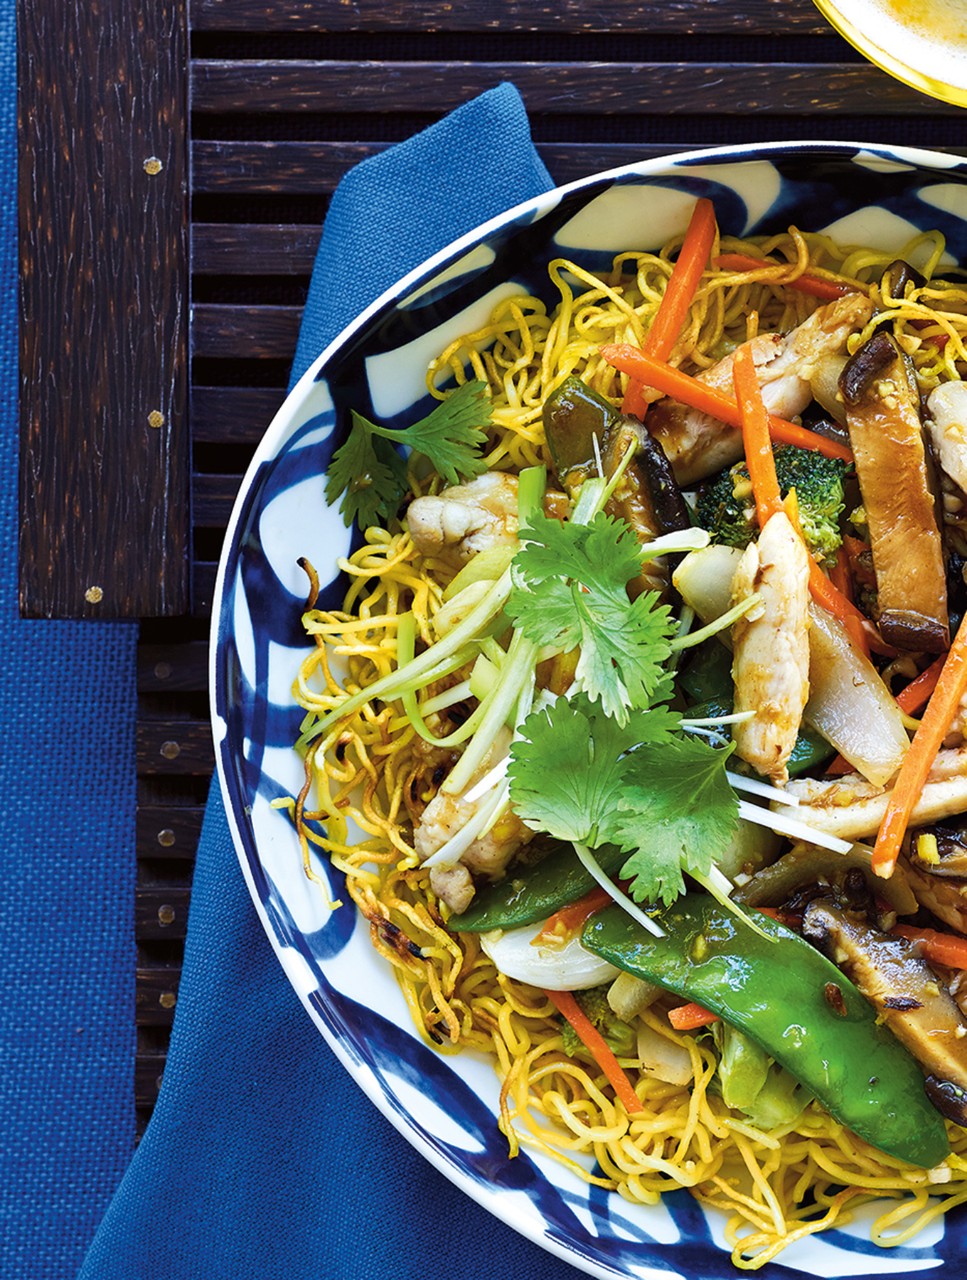 Chow Mein Hong Kong-Style